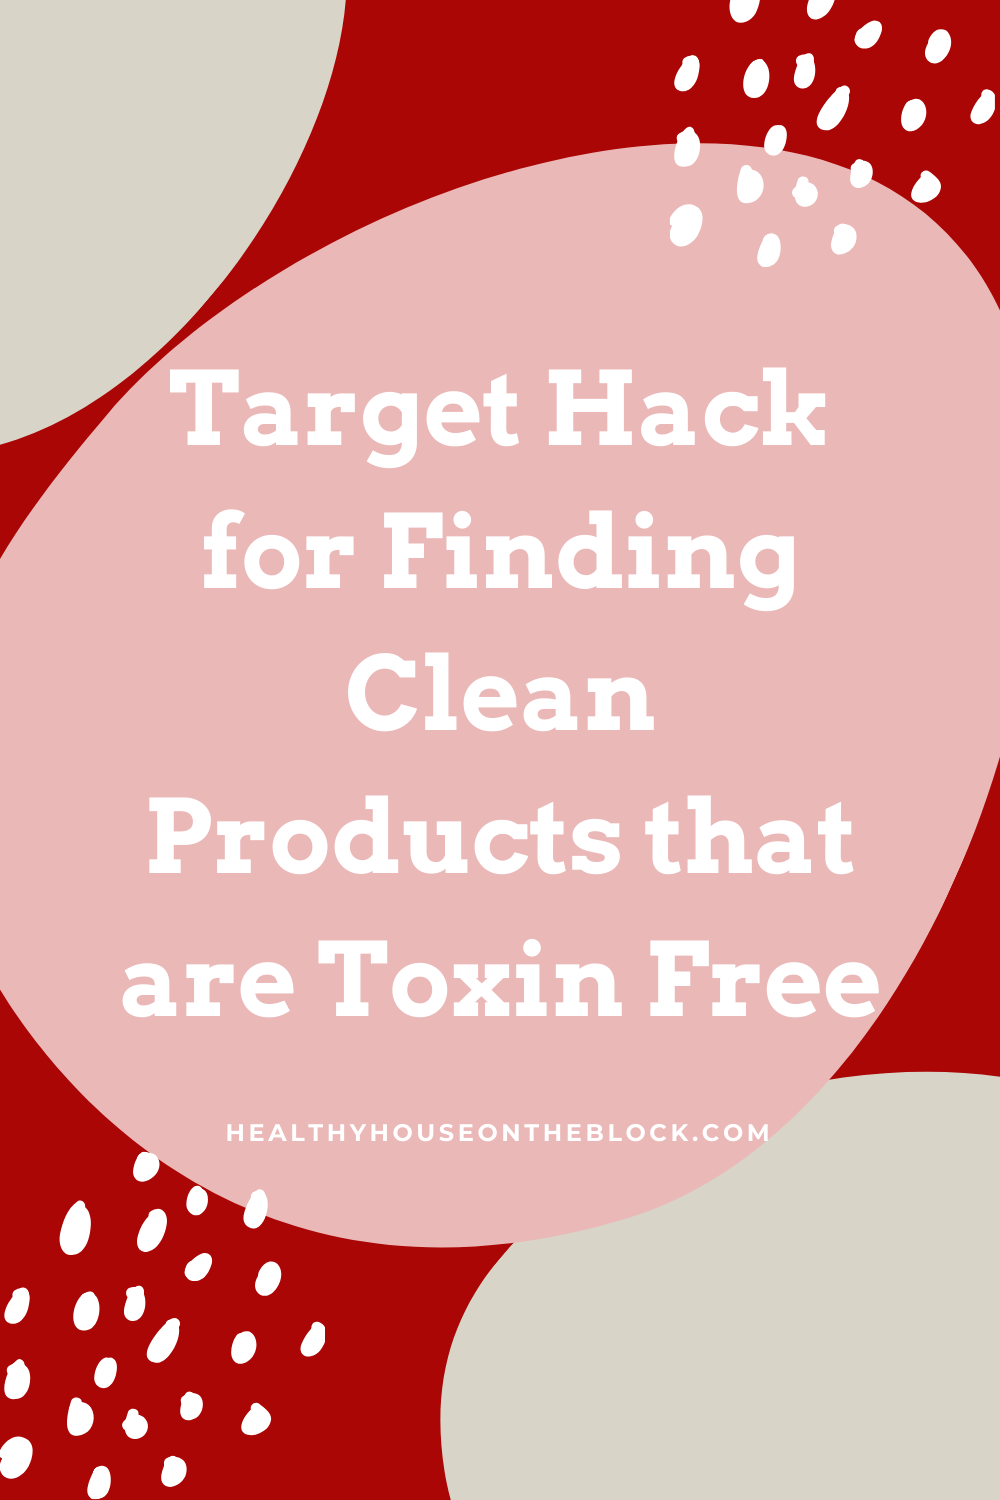 Target Hack for Finding Clean Products that are Toxin Free